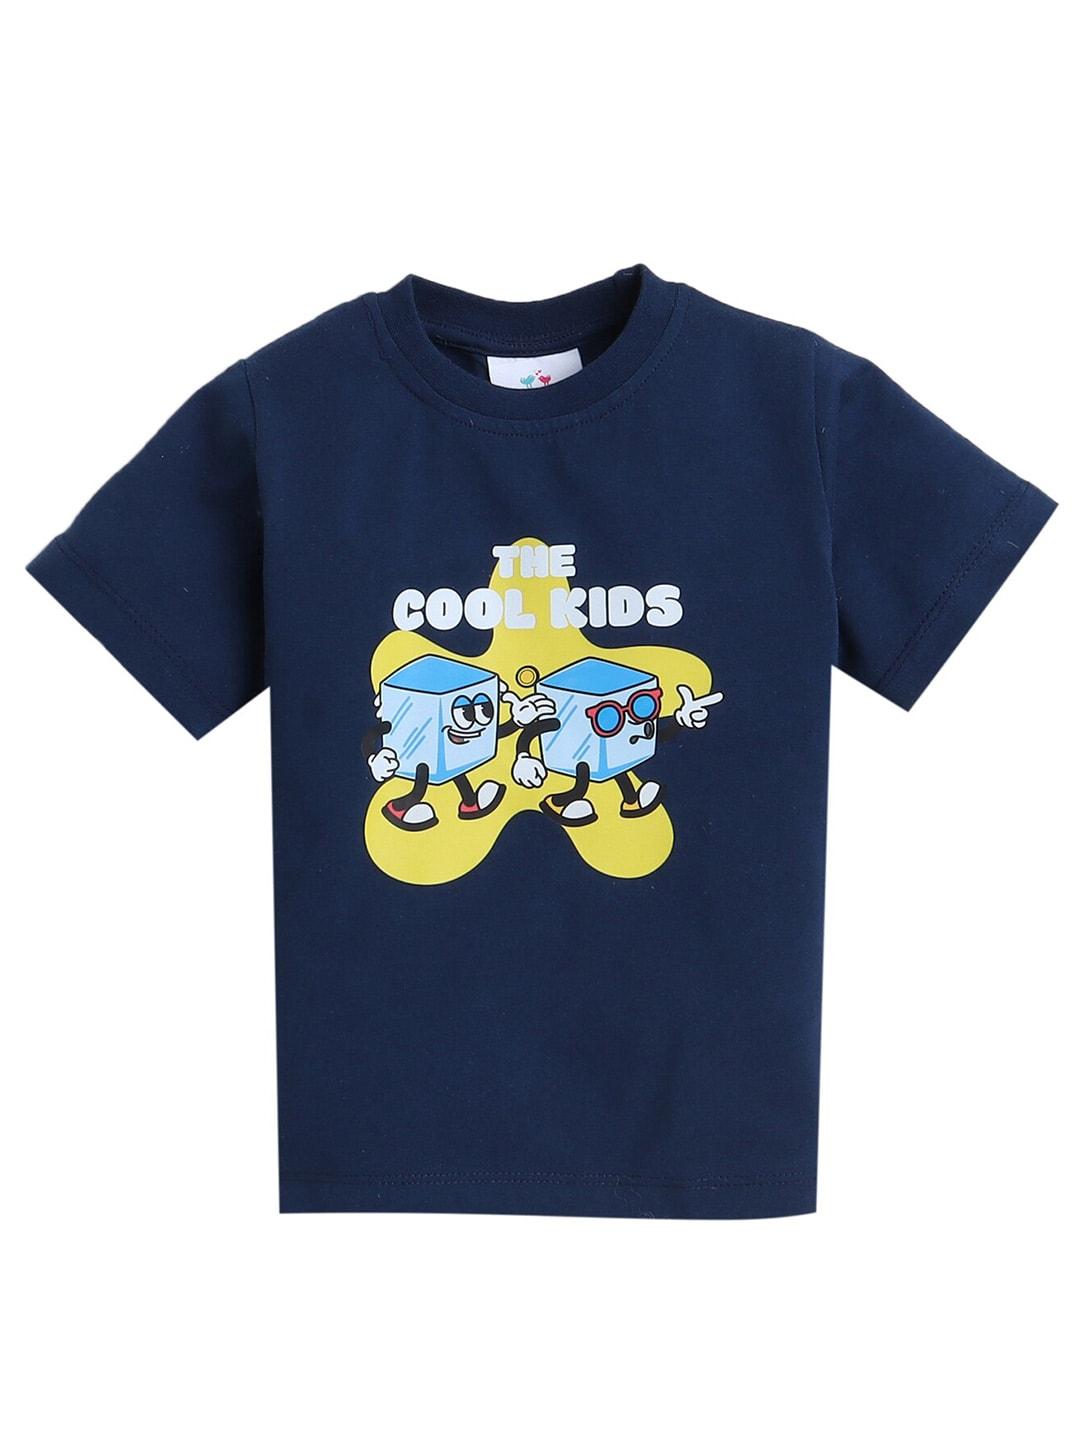 Knitting Doodles Boys Typography Printed Round Neck Regular Fit Cotton T-Shirt